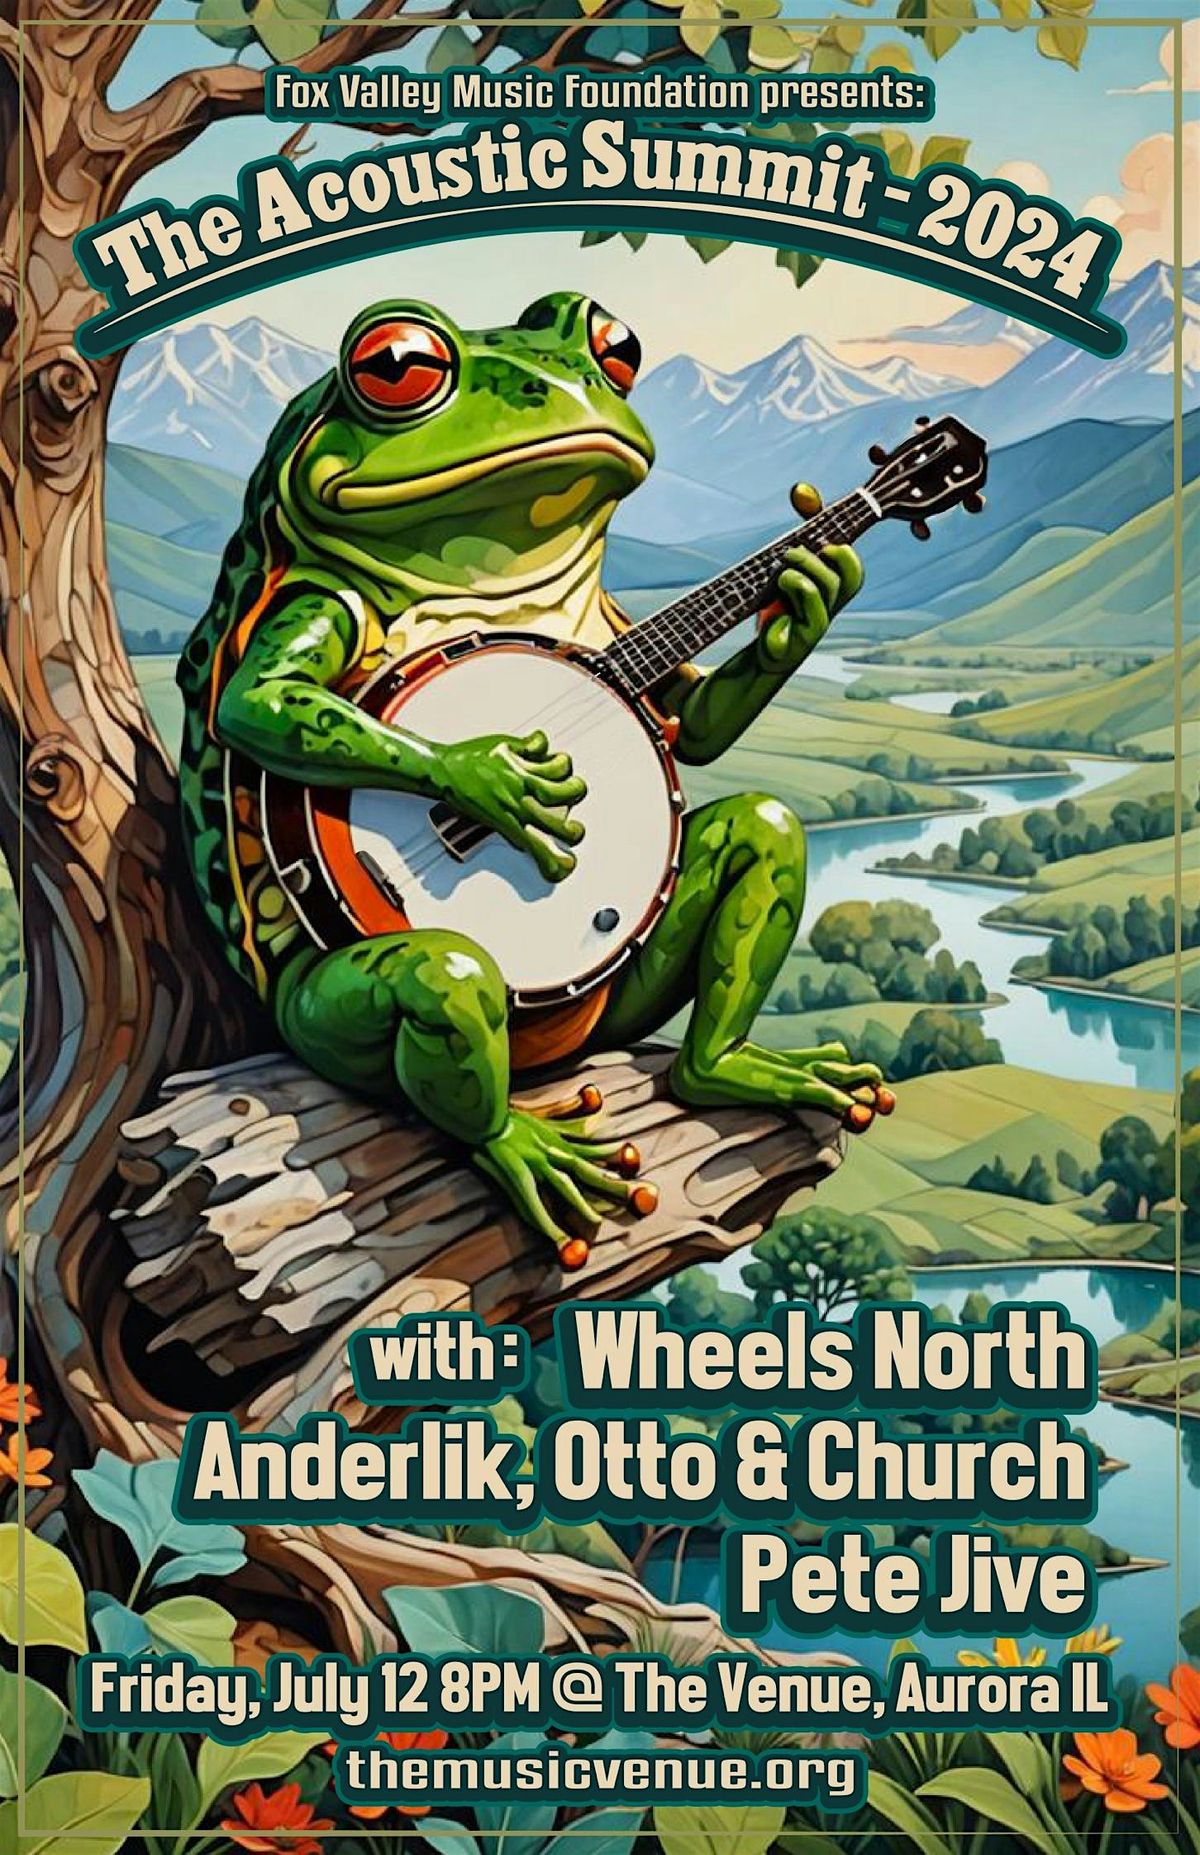 THE ACOUSTIC SUMMIT with Wheels North | Anderlik, Otto & Church | Pete Jive